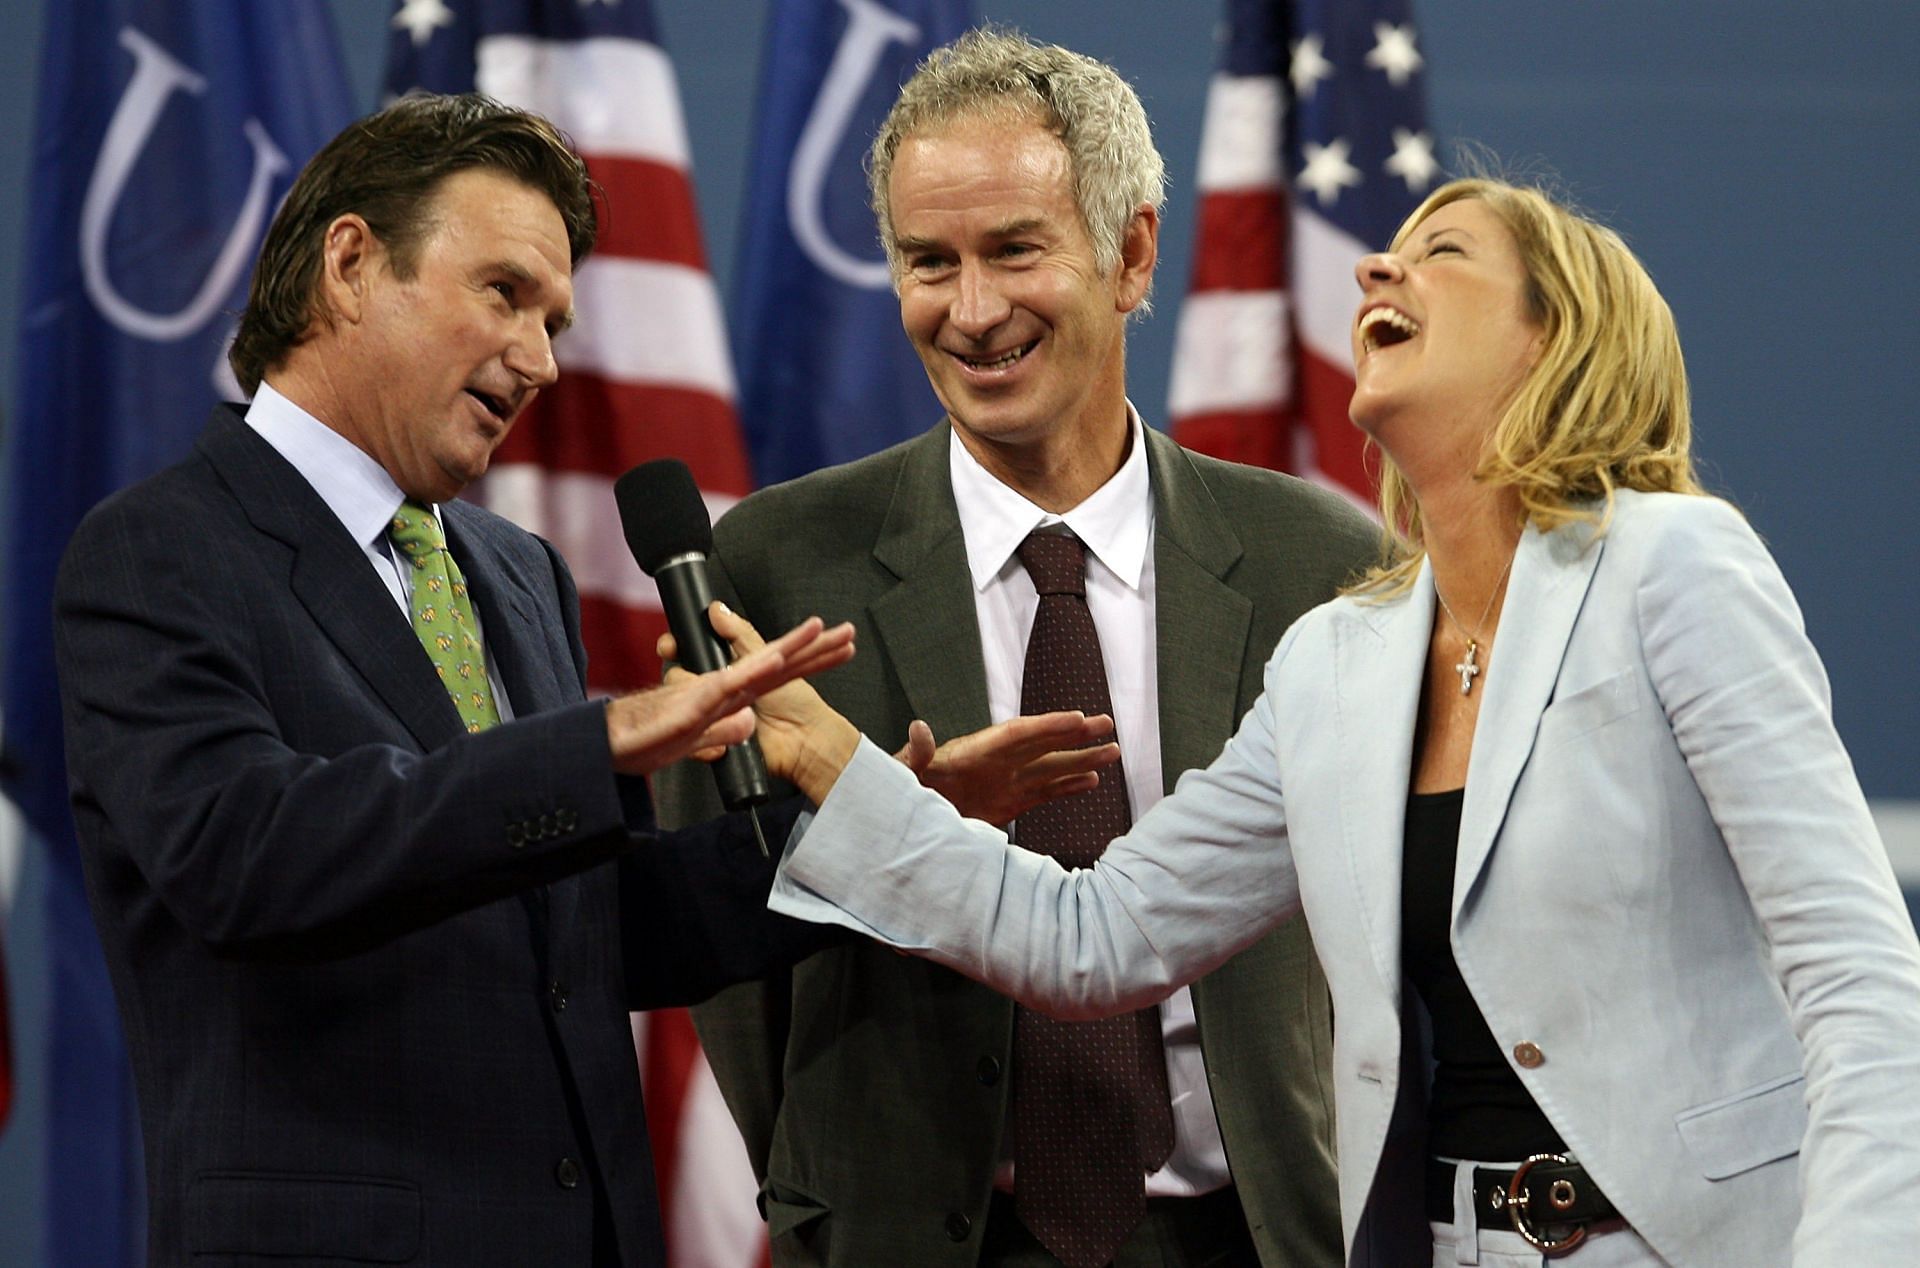 Chris Evert, Jimmy Connors and John McEnroe at the 2006 US Open